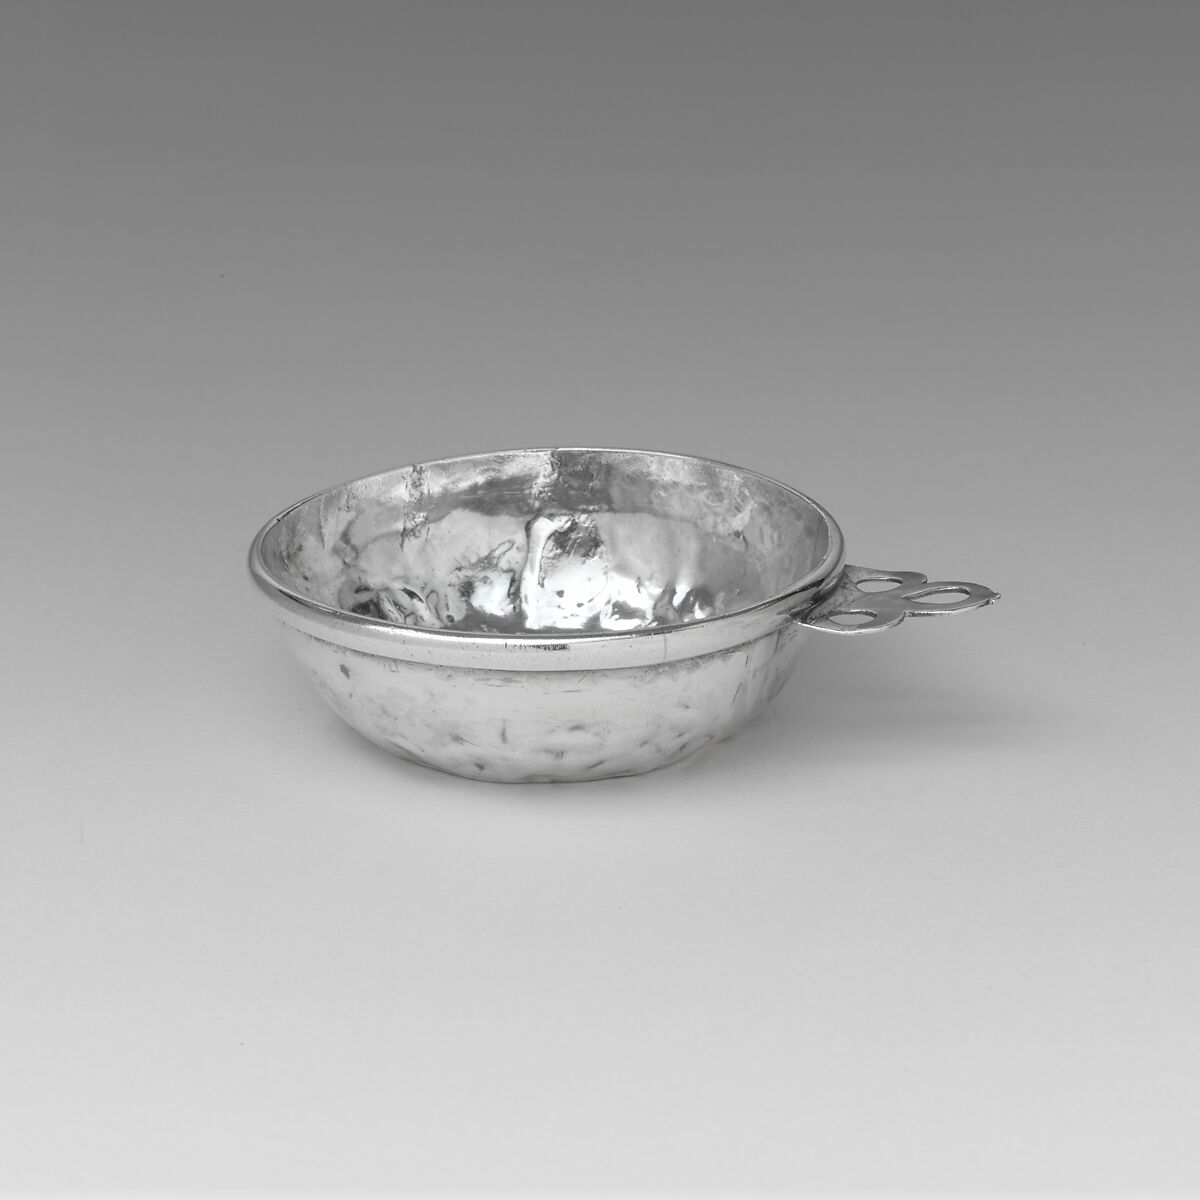 Dram Cup, Silver, American 